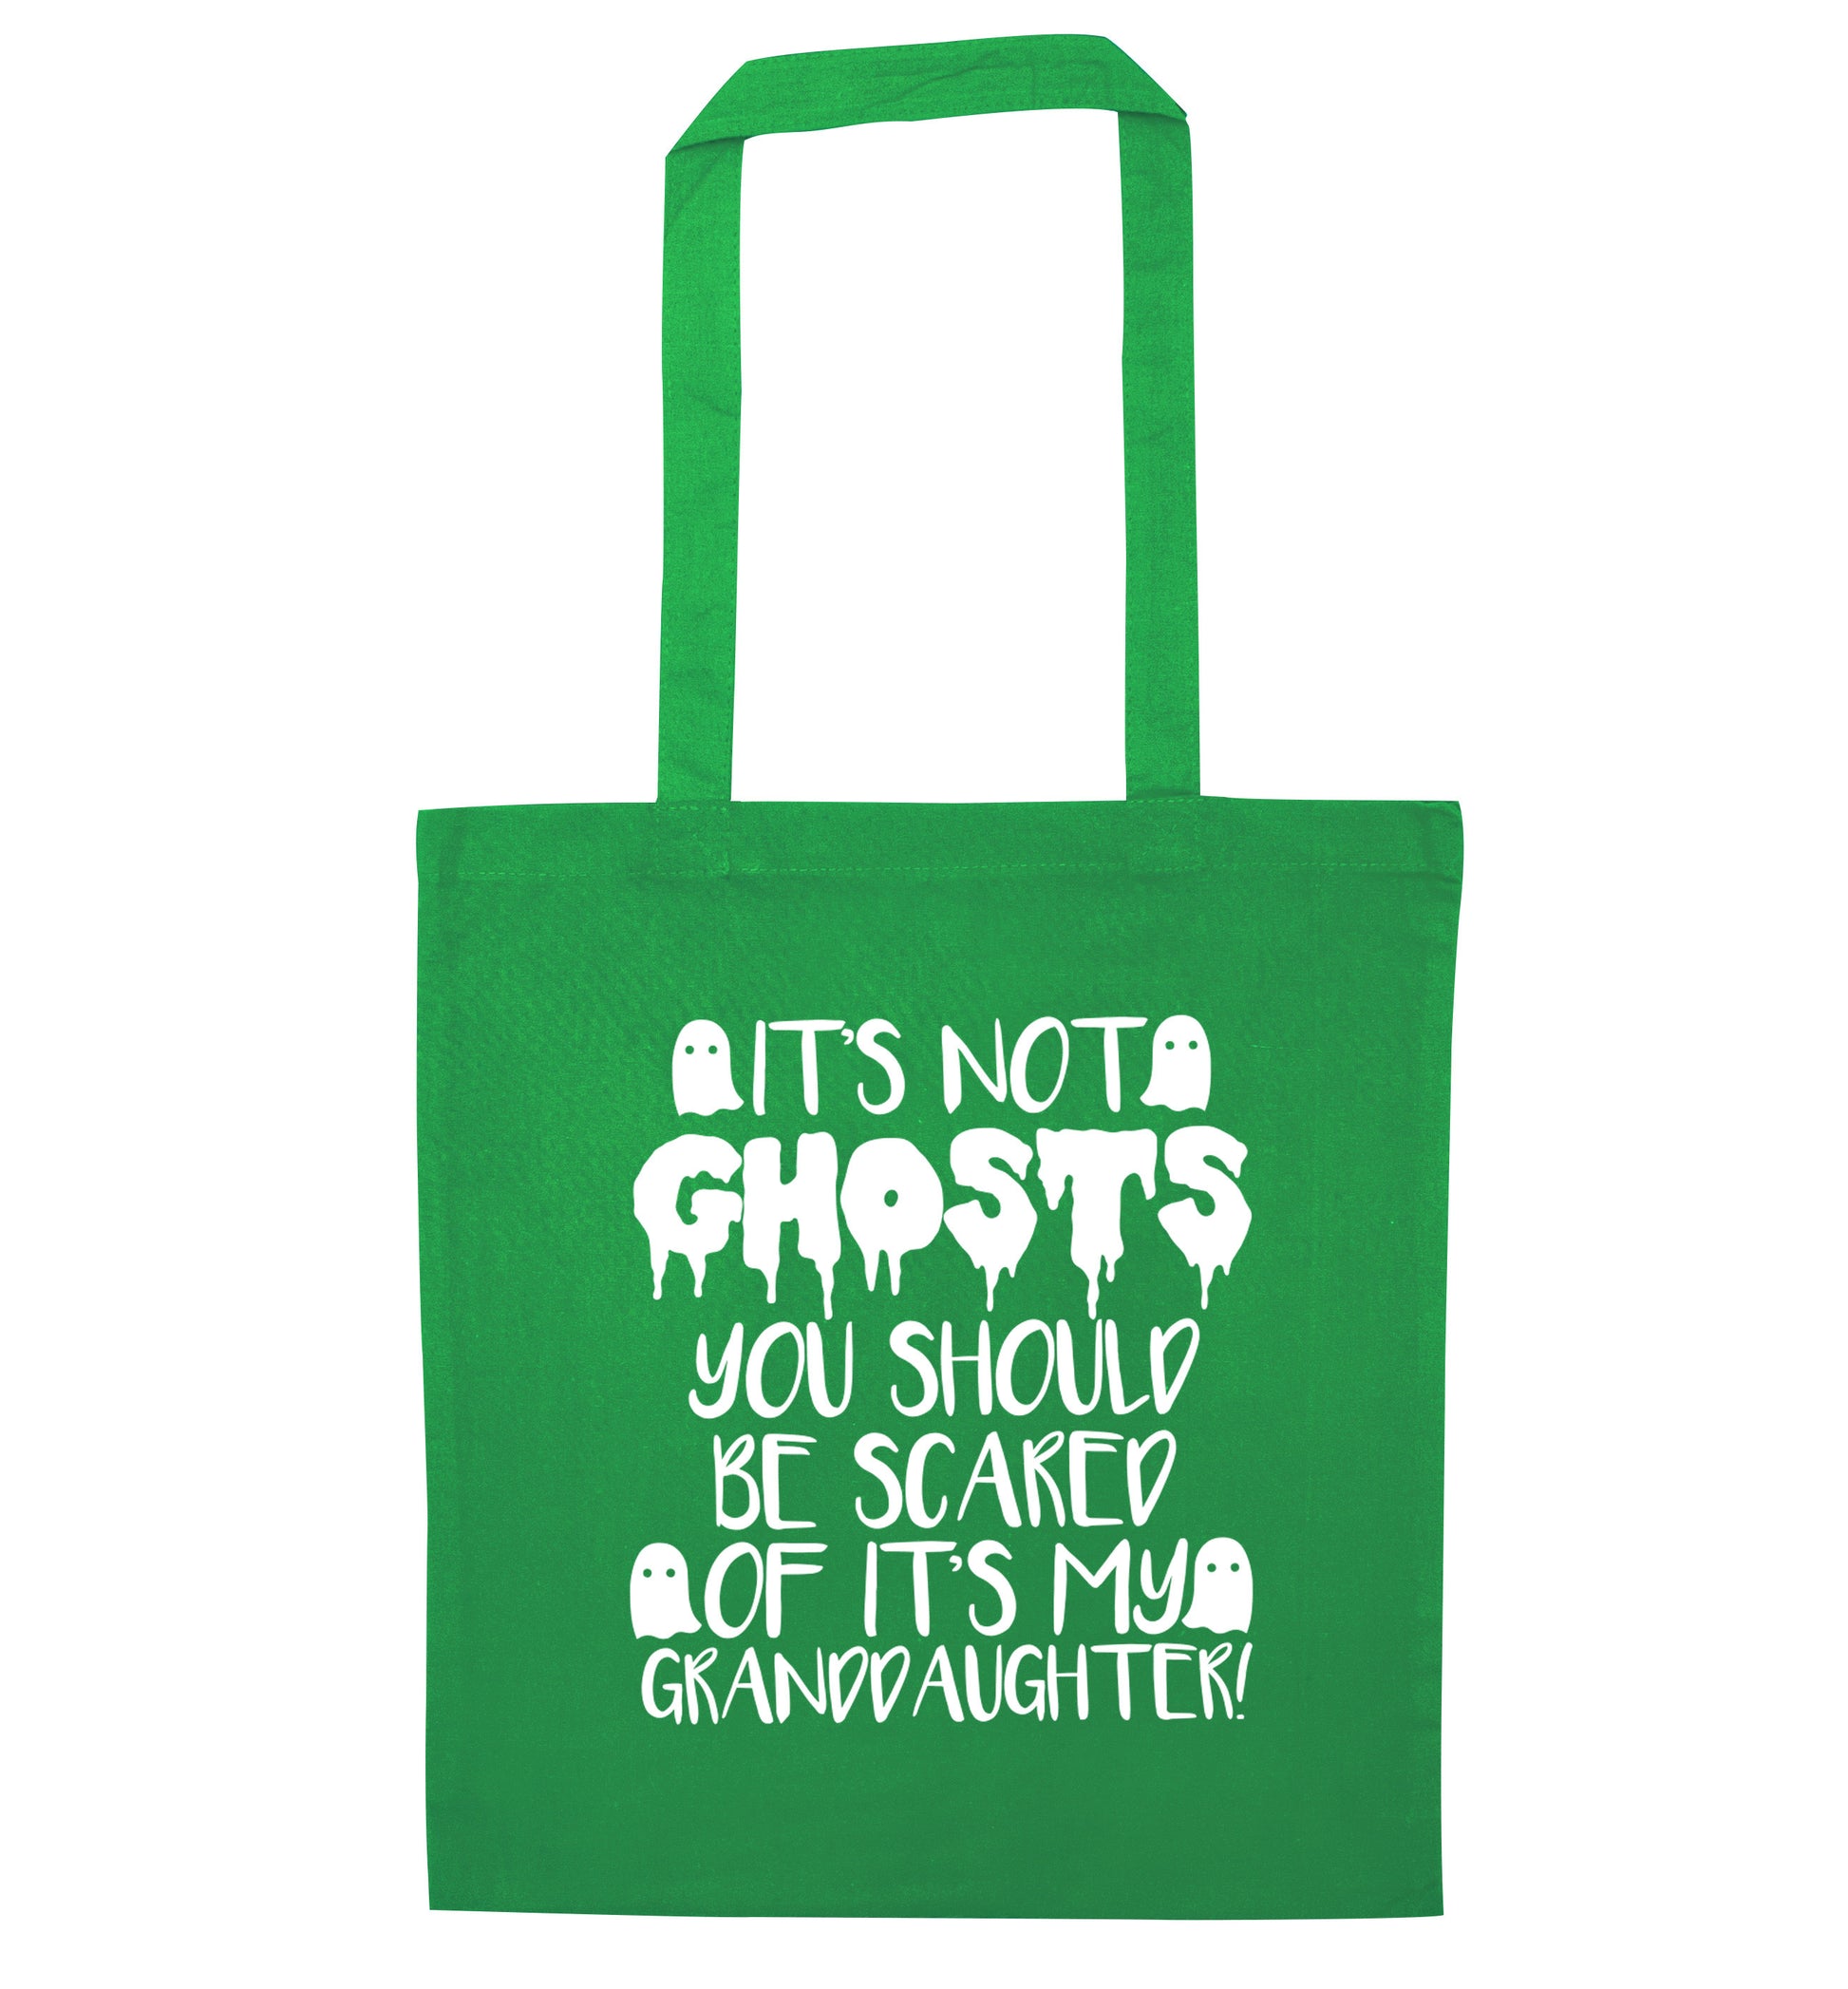 It's not ghosts you should be scared of it's my granddaughter! green tote bag